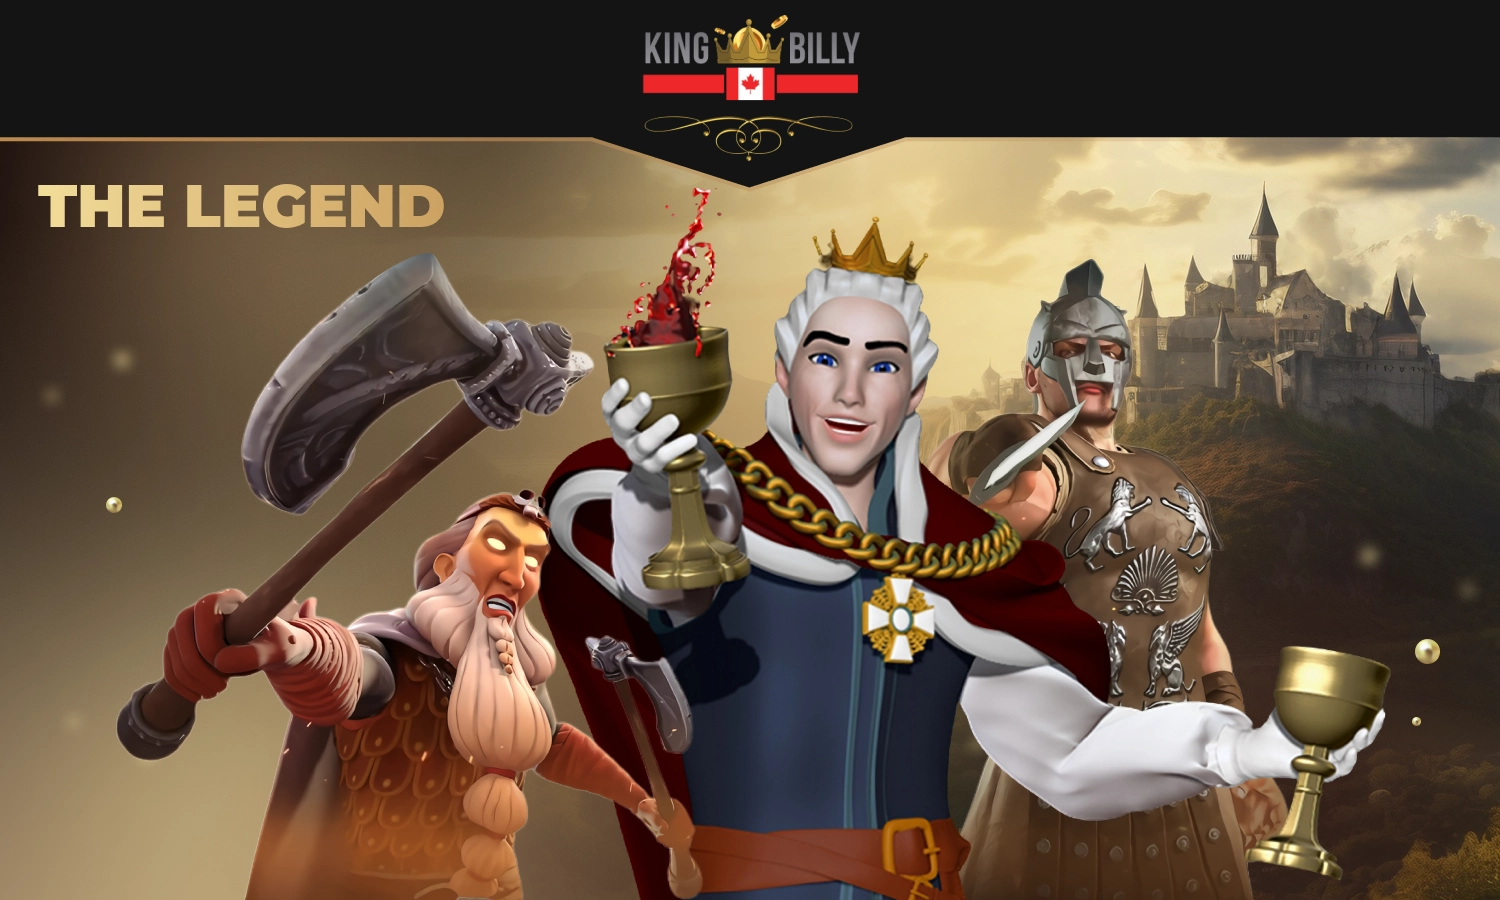 In the kingdom of King Billy, Canadian players will find a fascinating journey into an exciting and incredible world filled with games and entertainment